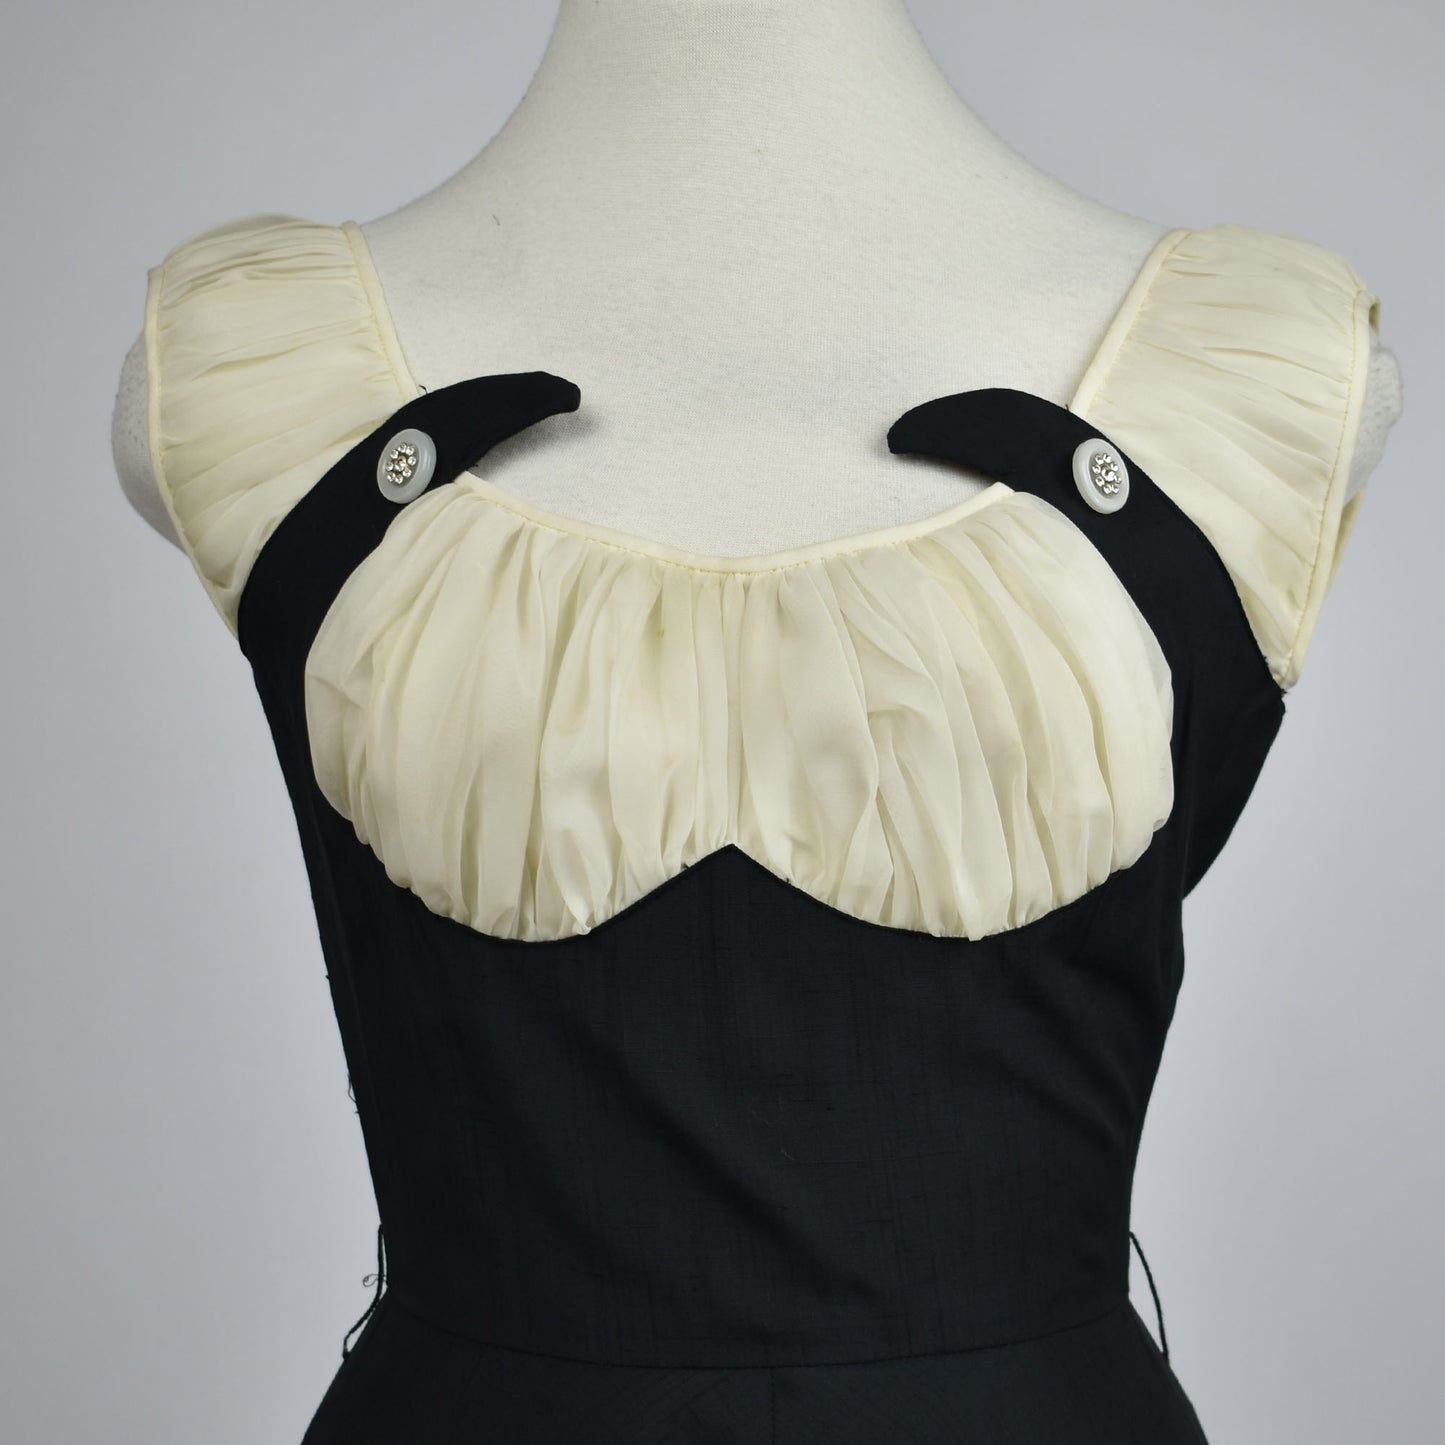 Vintage 1950s Black and White A-Line Dress with Underbust Corset Shape, Ruching Details, and Bedazzled Accent Buttons